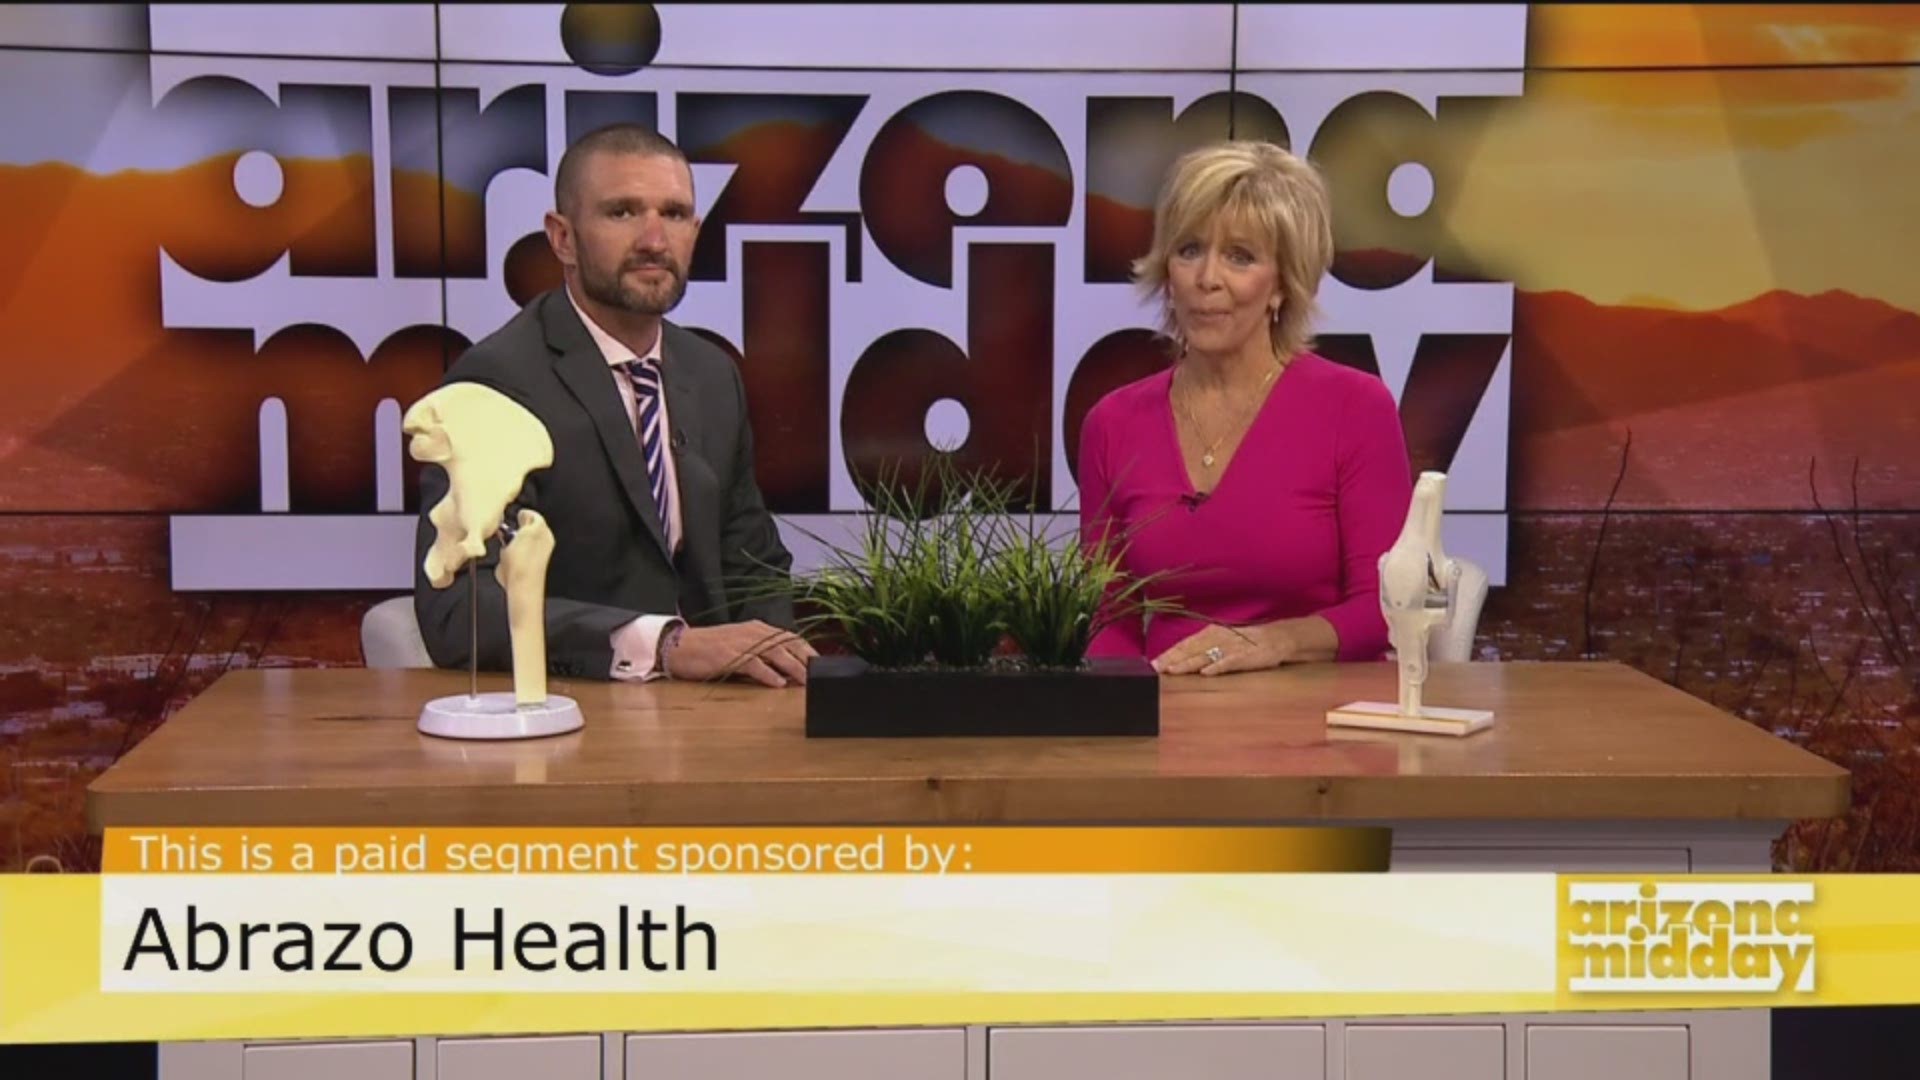 Brandon Gough, MD with Abrazo Health talks to us about the advancements made in hip and knee replacement surgeries